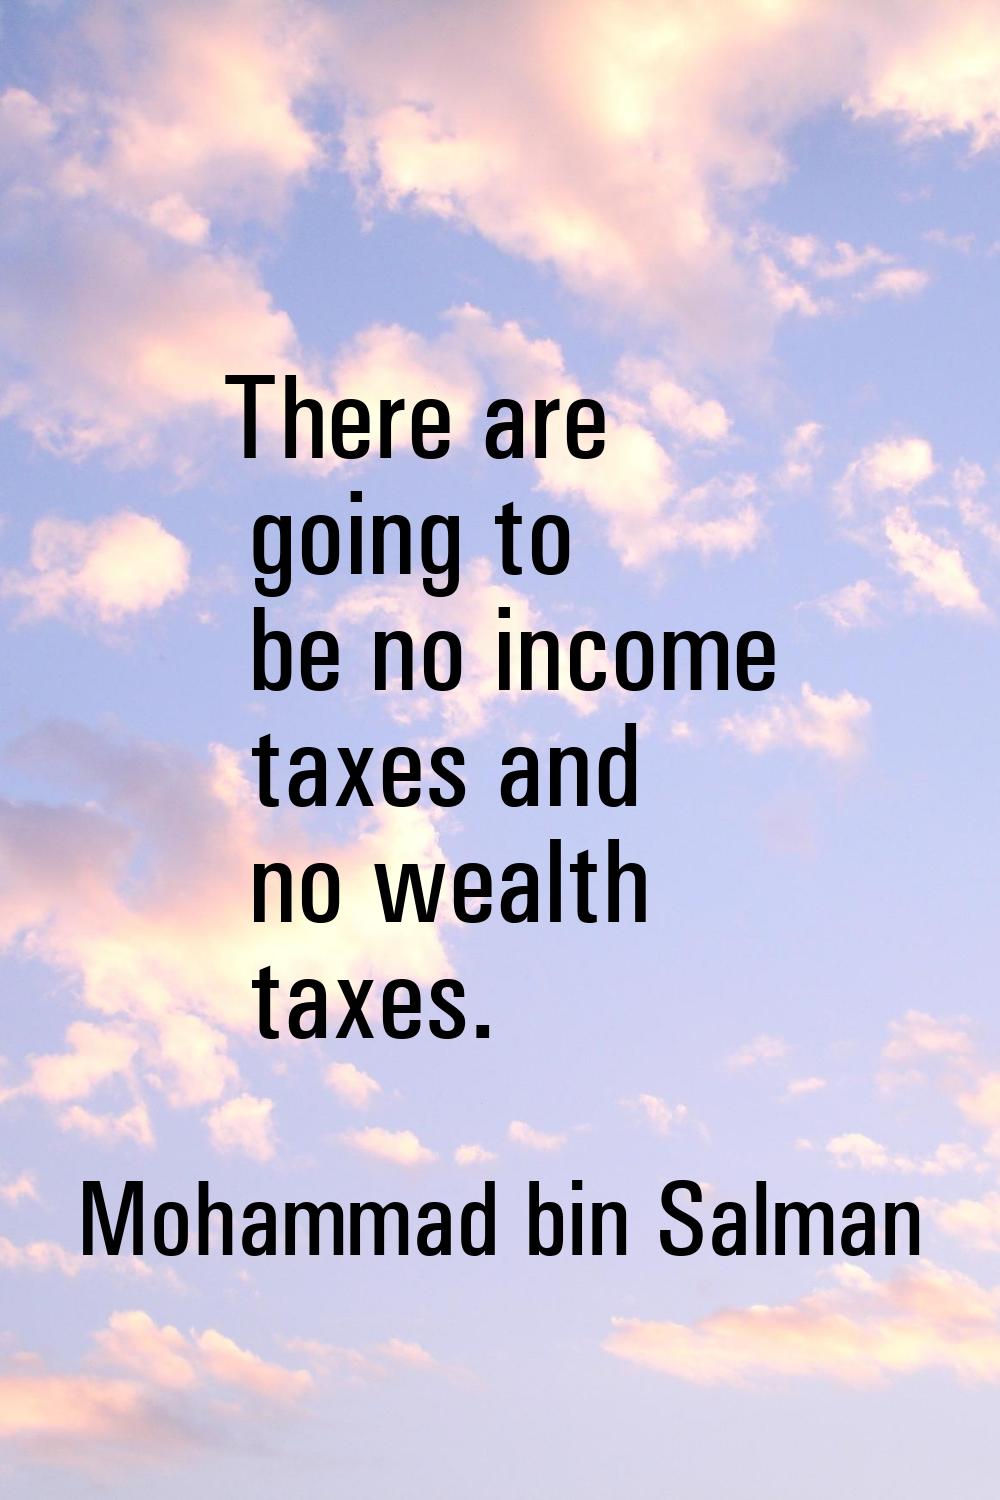 There are going to be no income taxes and no wealth taxes.